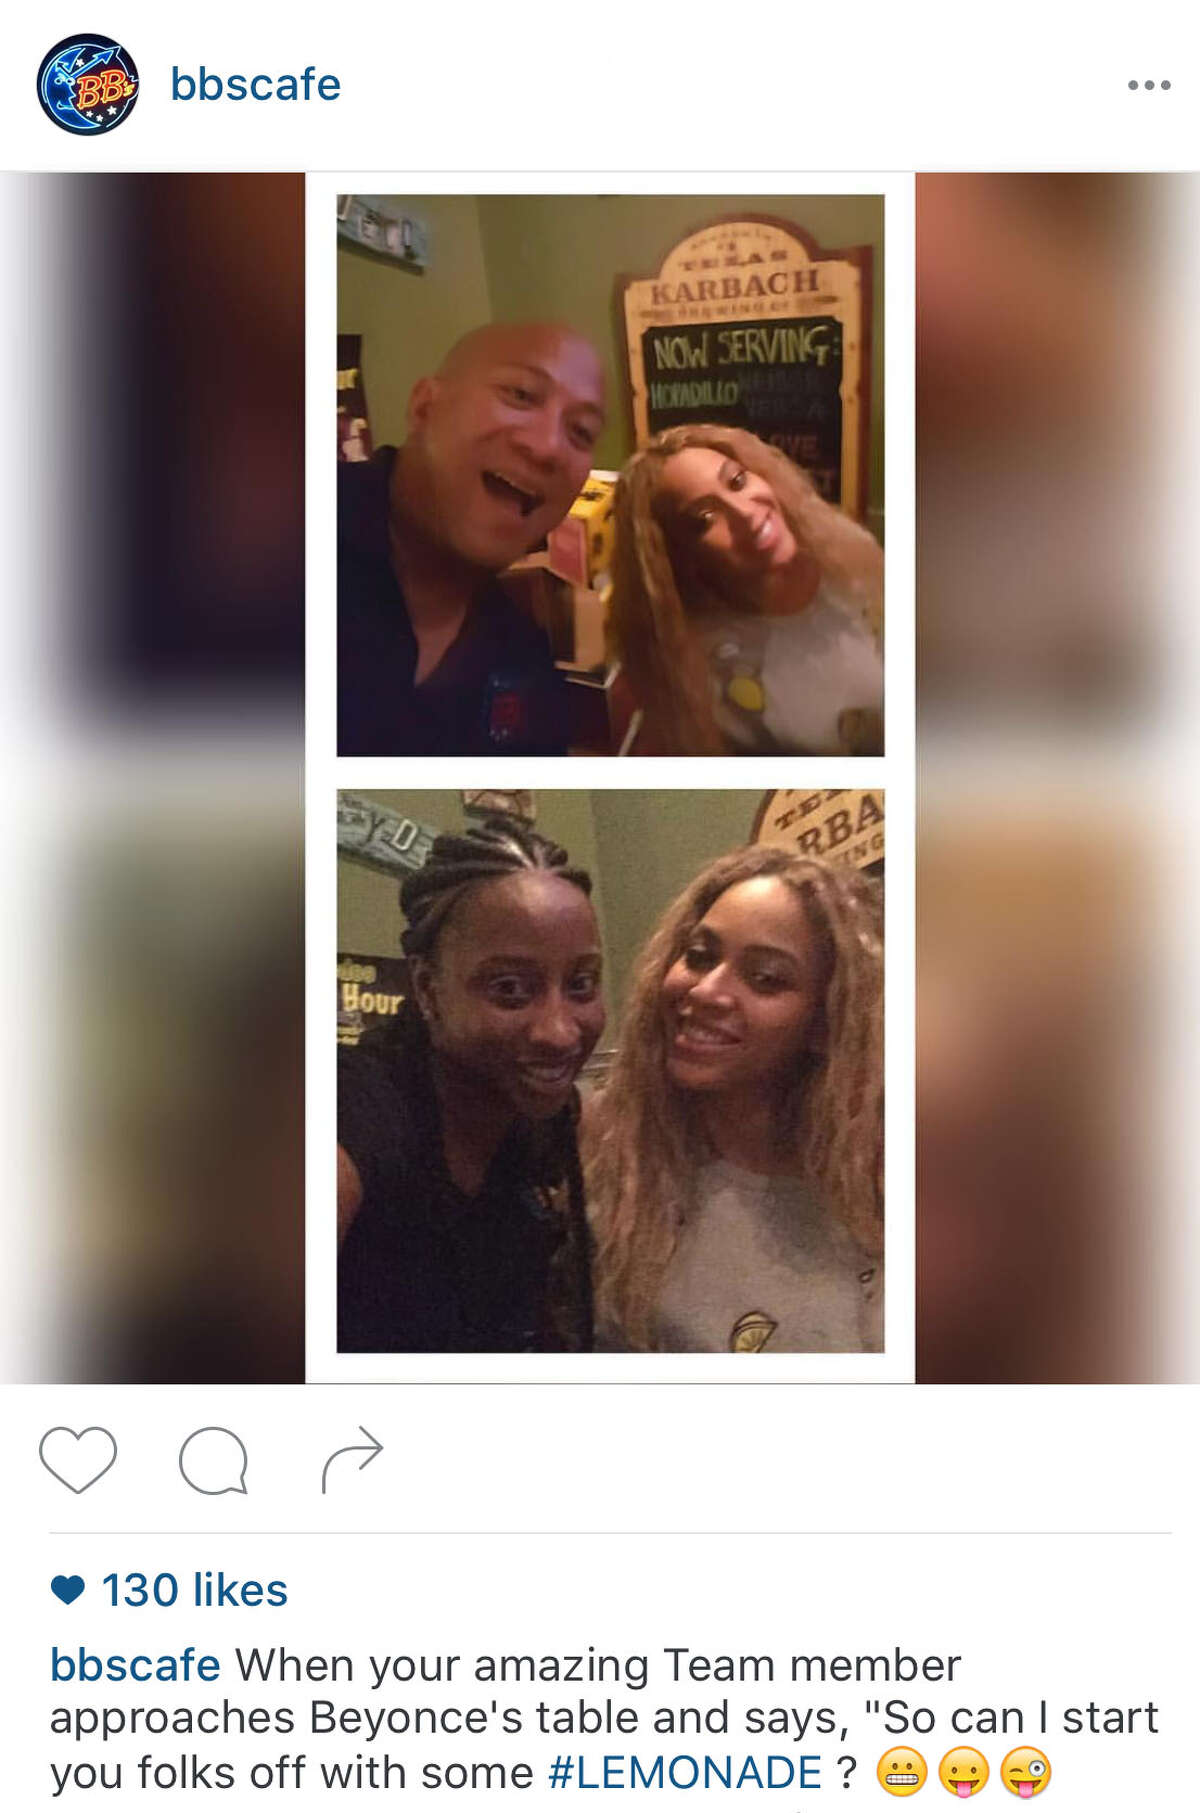 Beyoncé visited BB's Cafe in Montrose the last time she was in town.